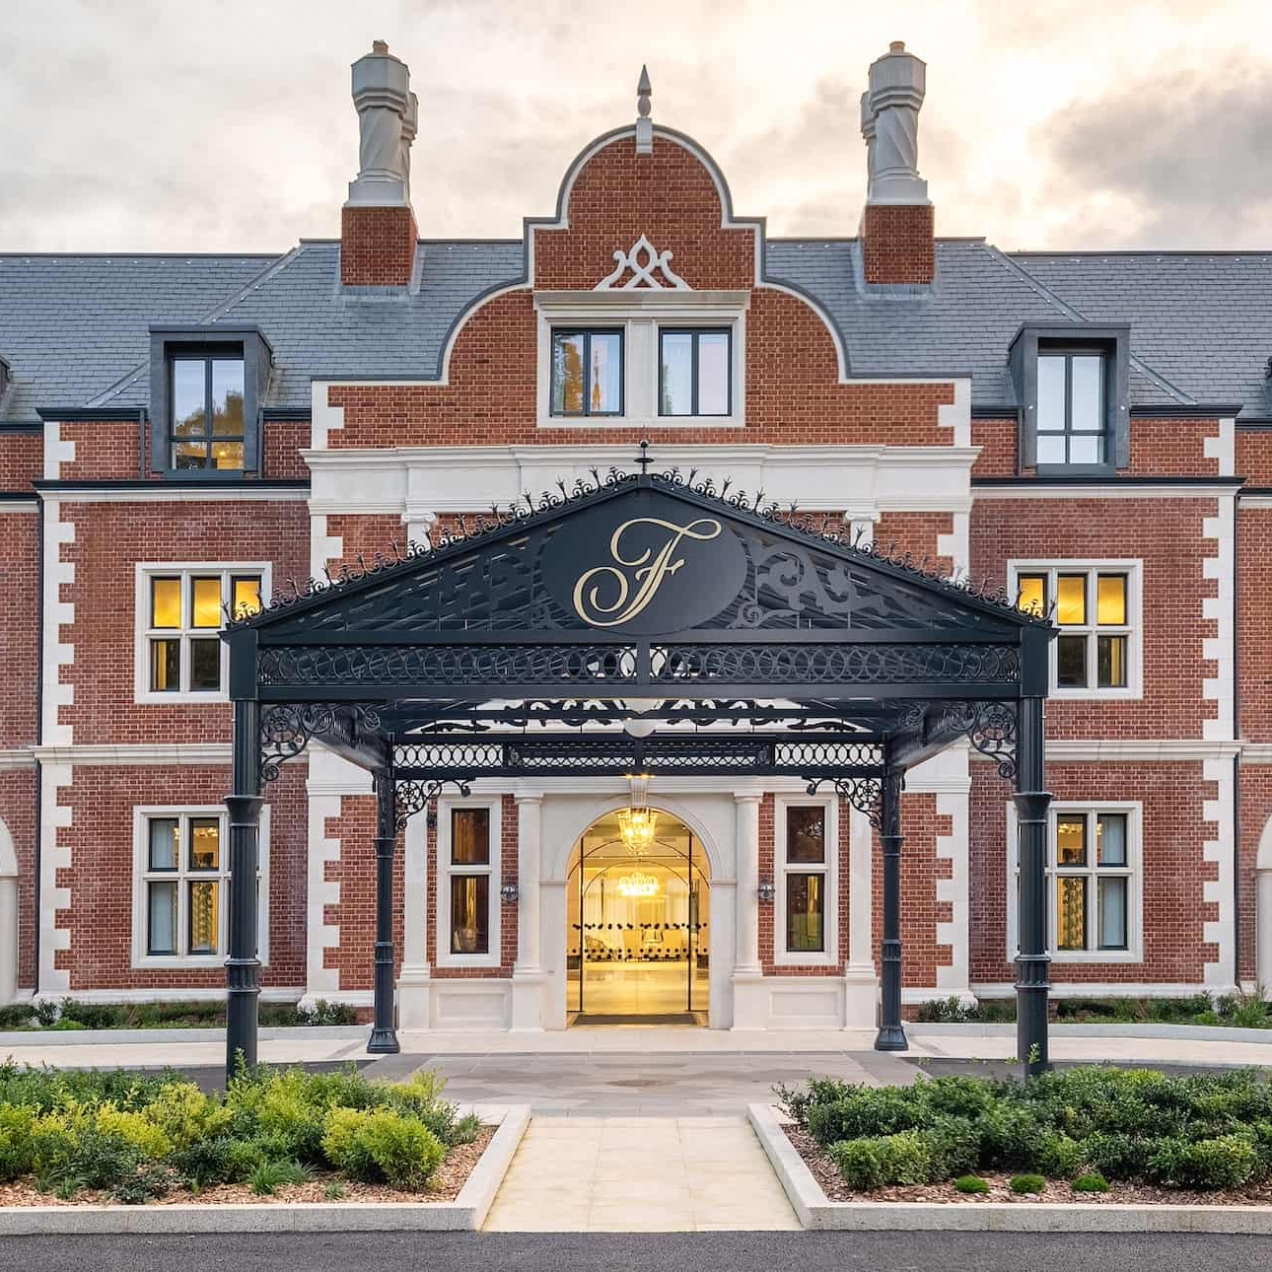 The exterior entrance of Fairmont Windsor Park, an ornate three storey red brick building with a dozen windows, eight chimneys and a decorate black canopy embossed with an italic F covering a portion of the green vehicle turning circle out front. It